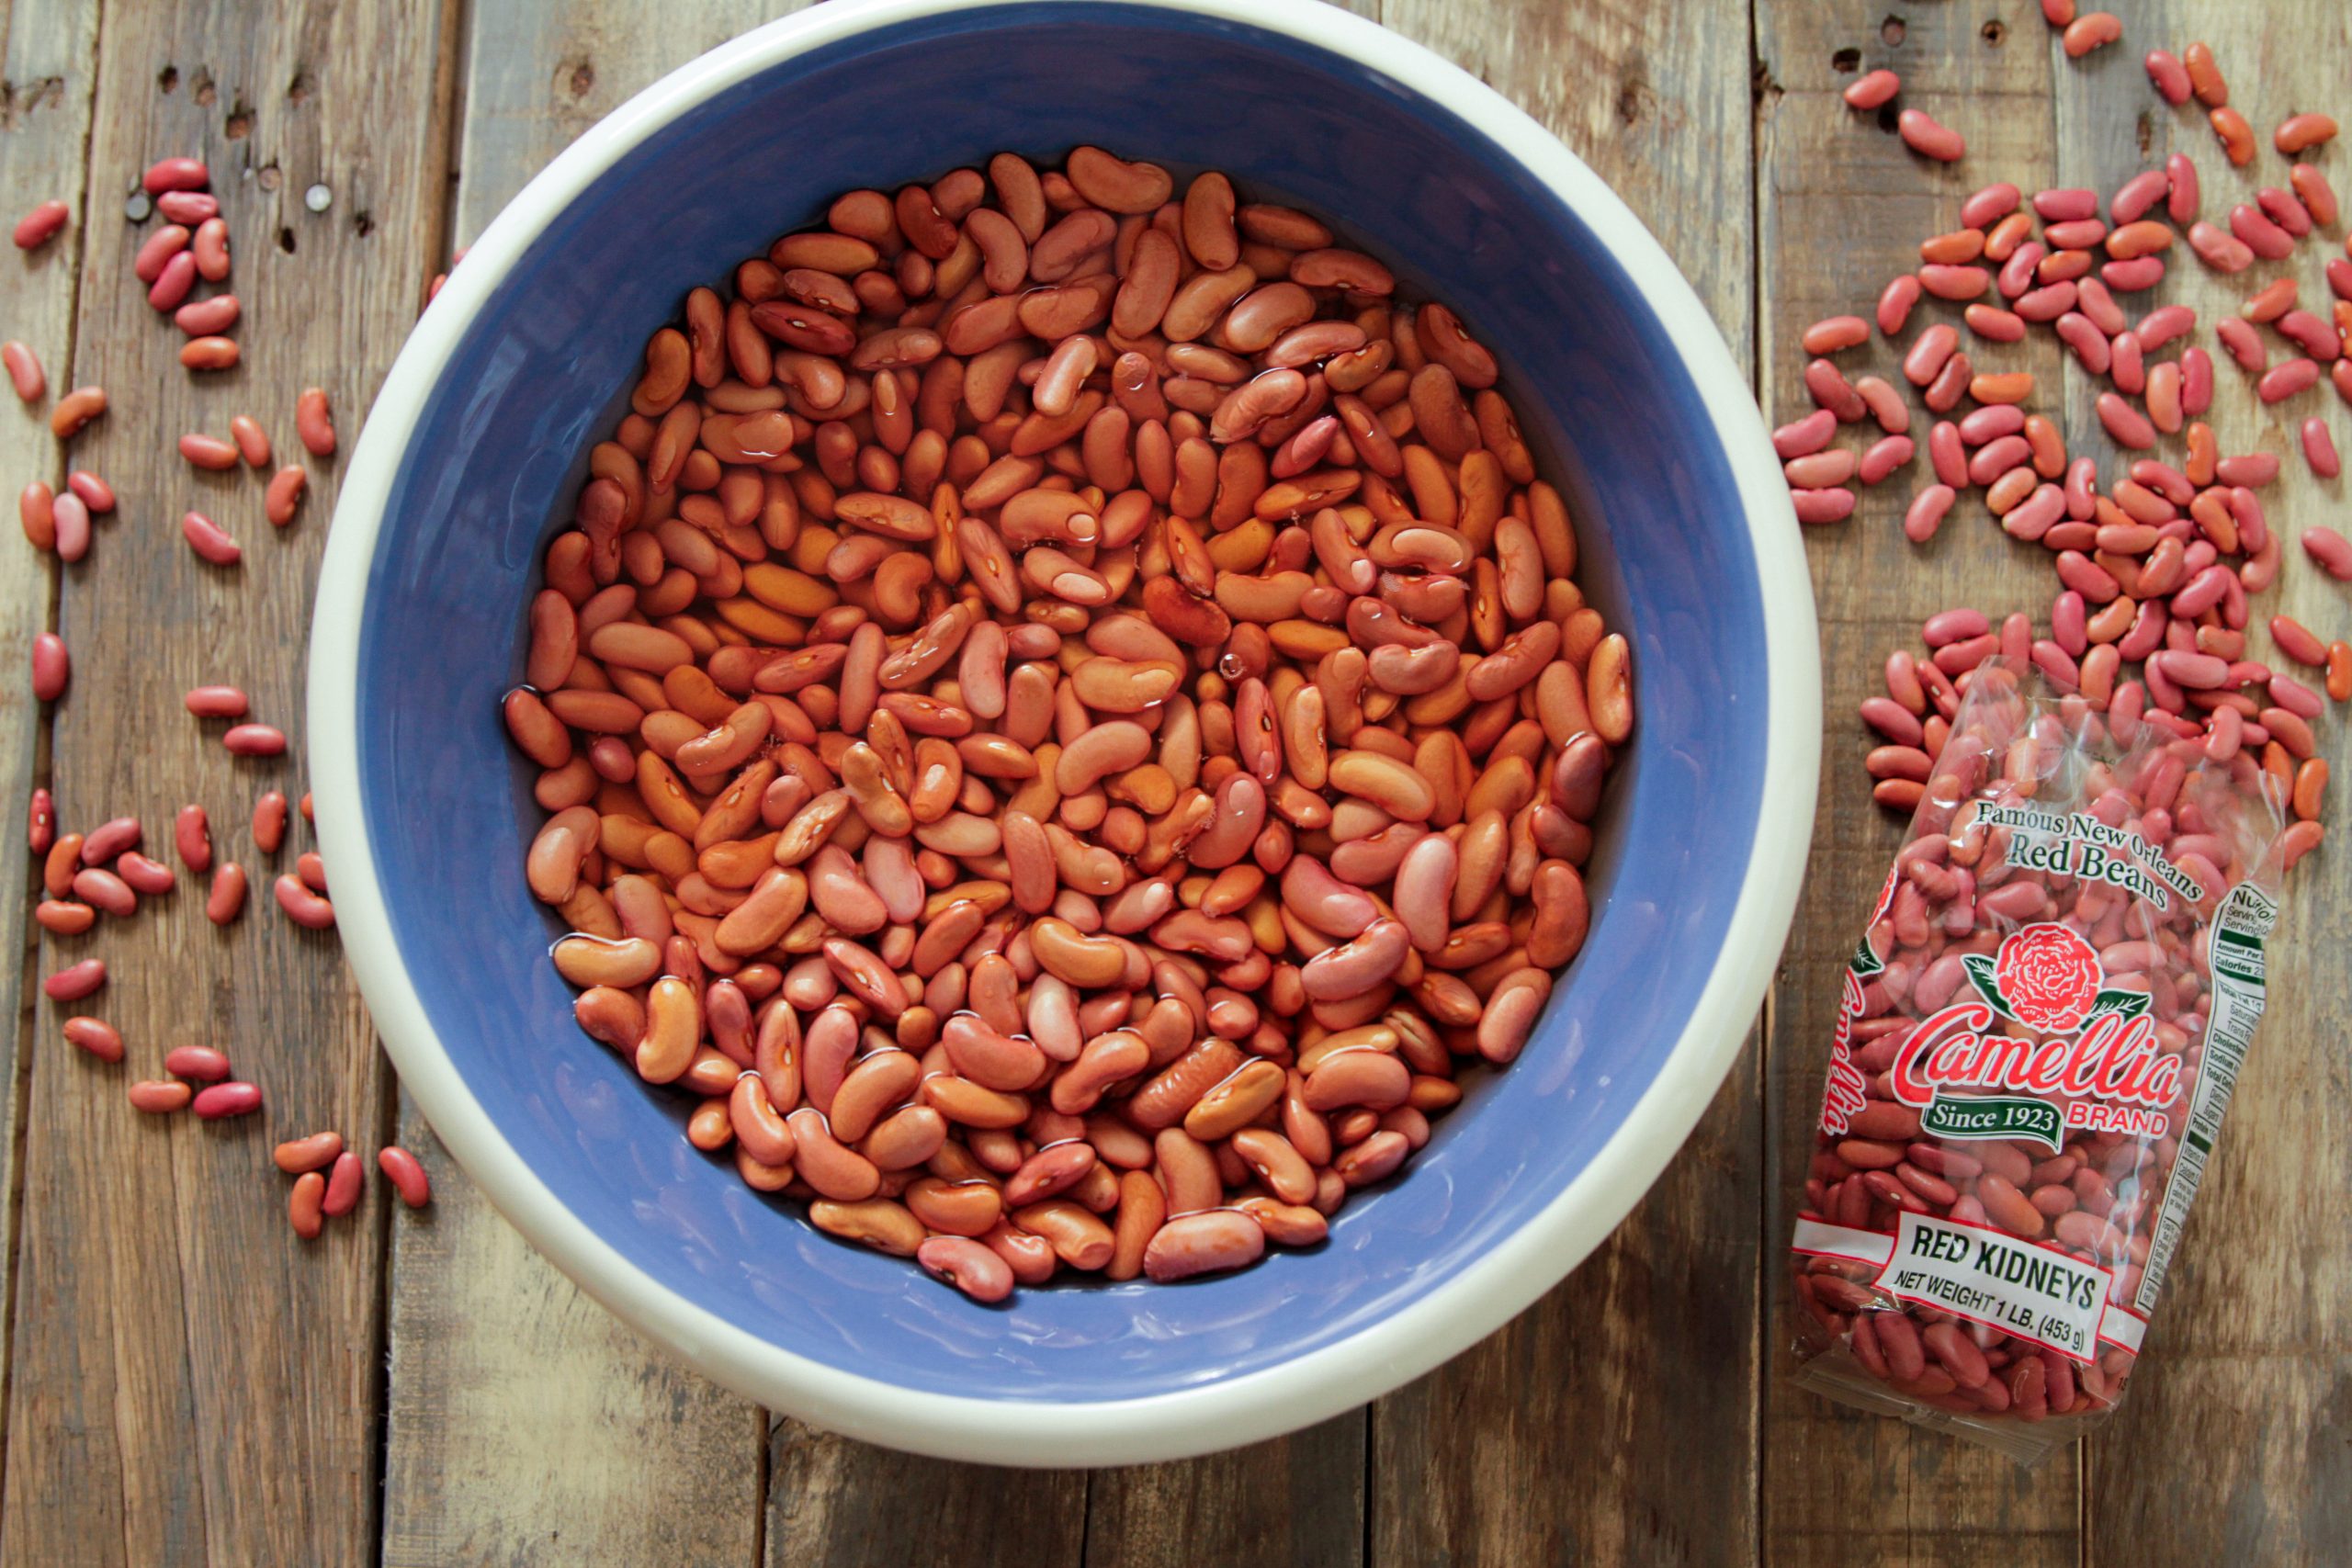 Soaking Beans 101: How to Soak Beans and Why - My Food Story